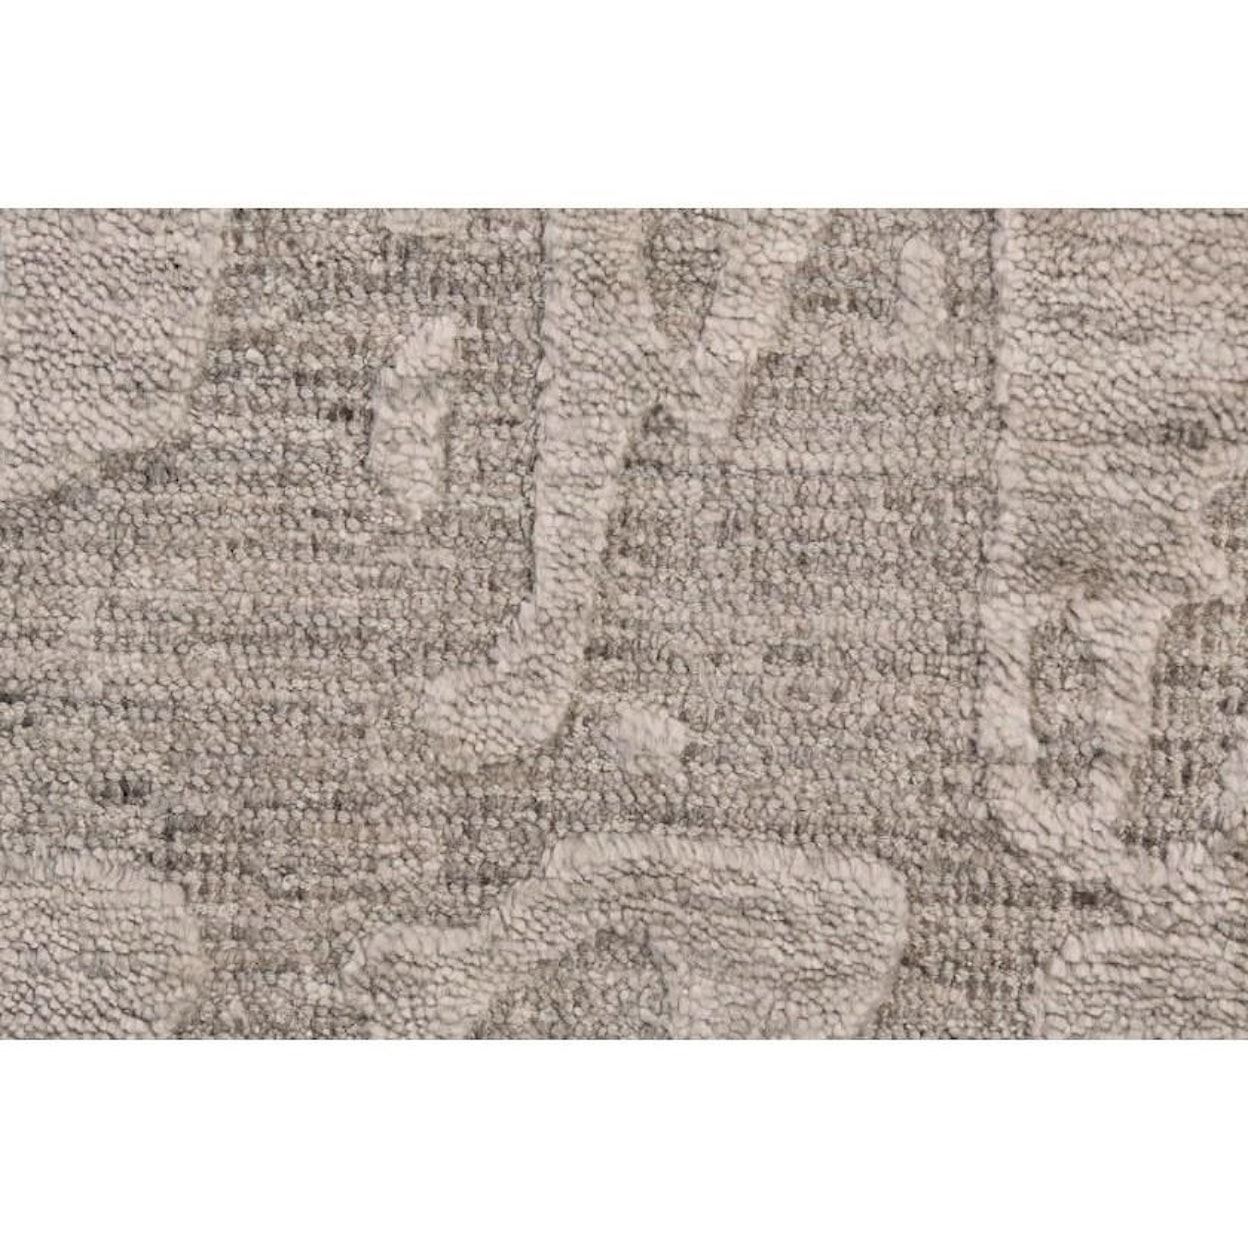 Feizy Rugs Leilani Taupe 8'-6" x 11'-6" Area Rug